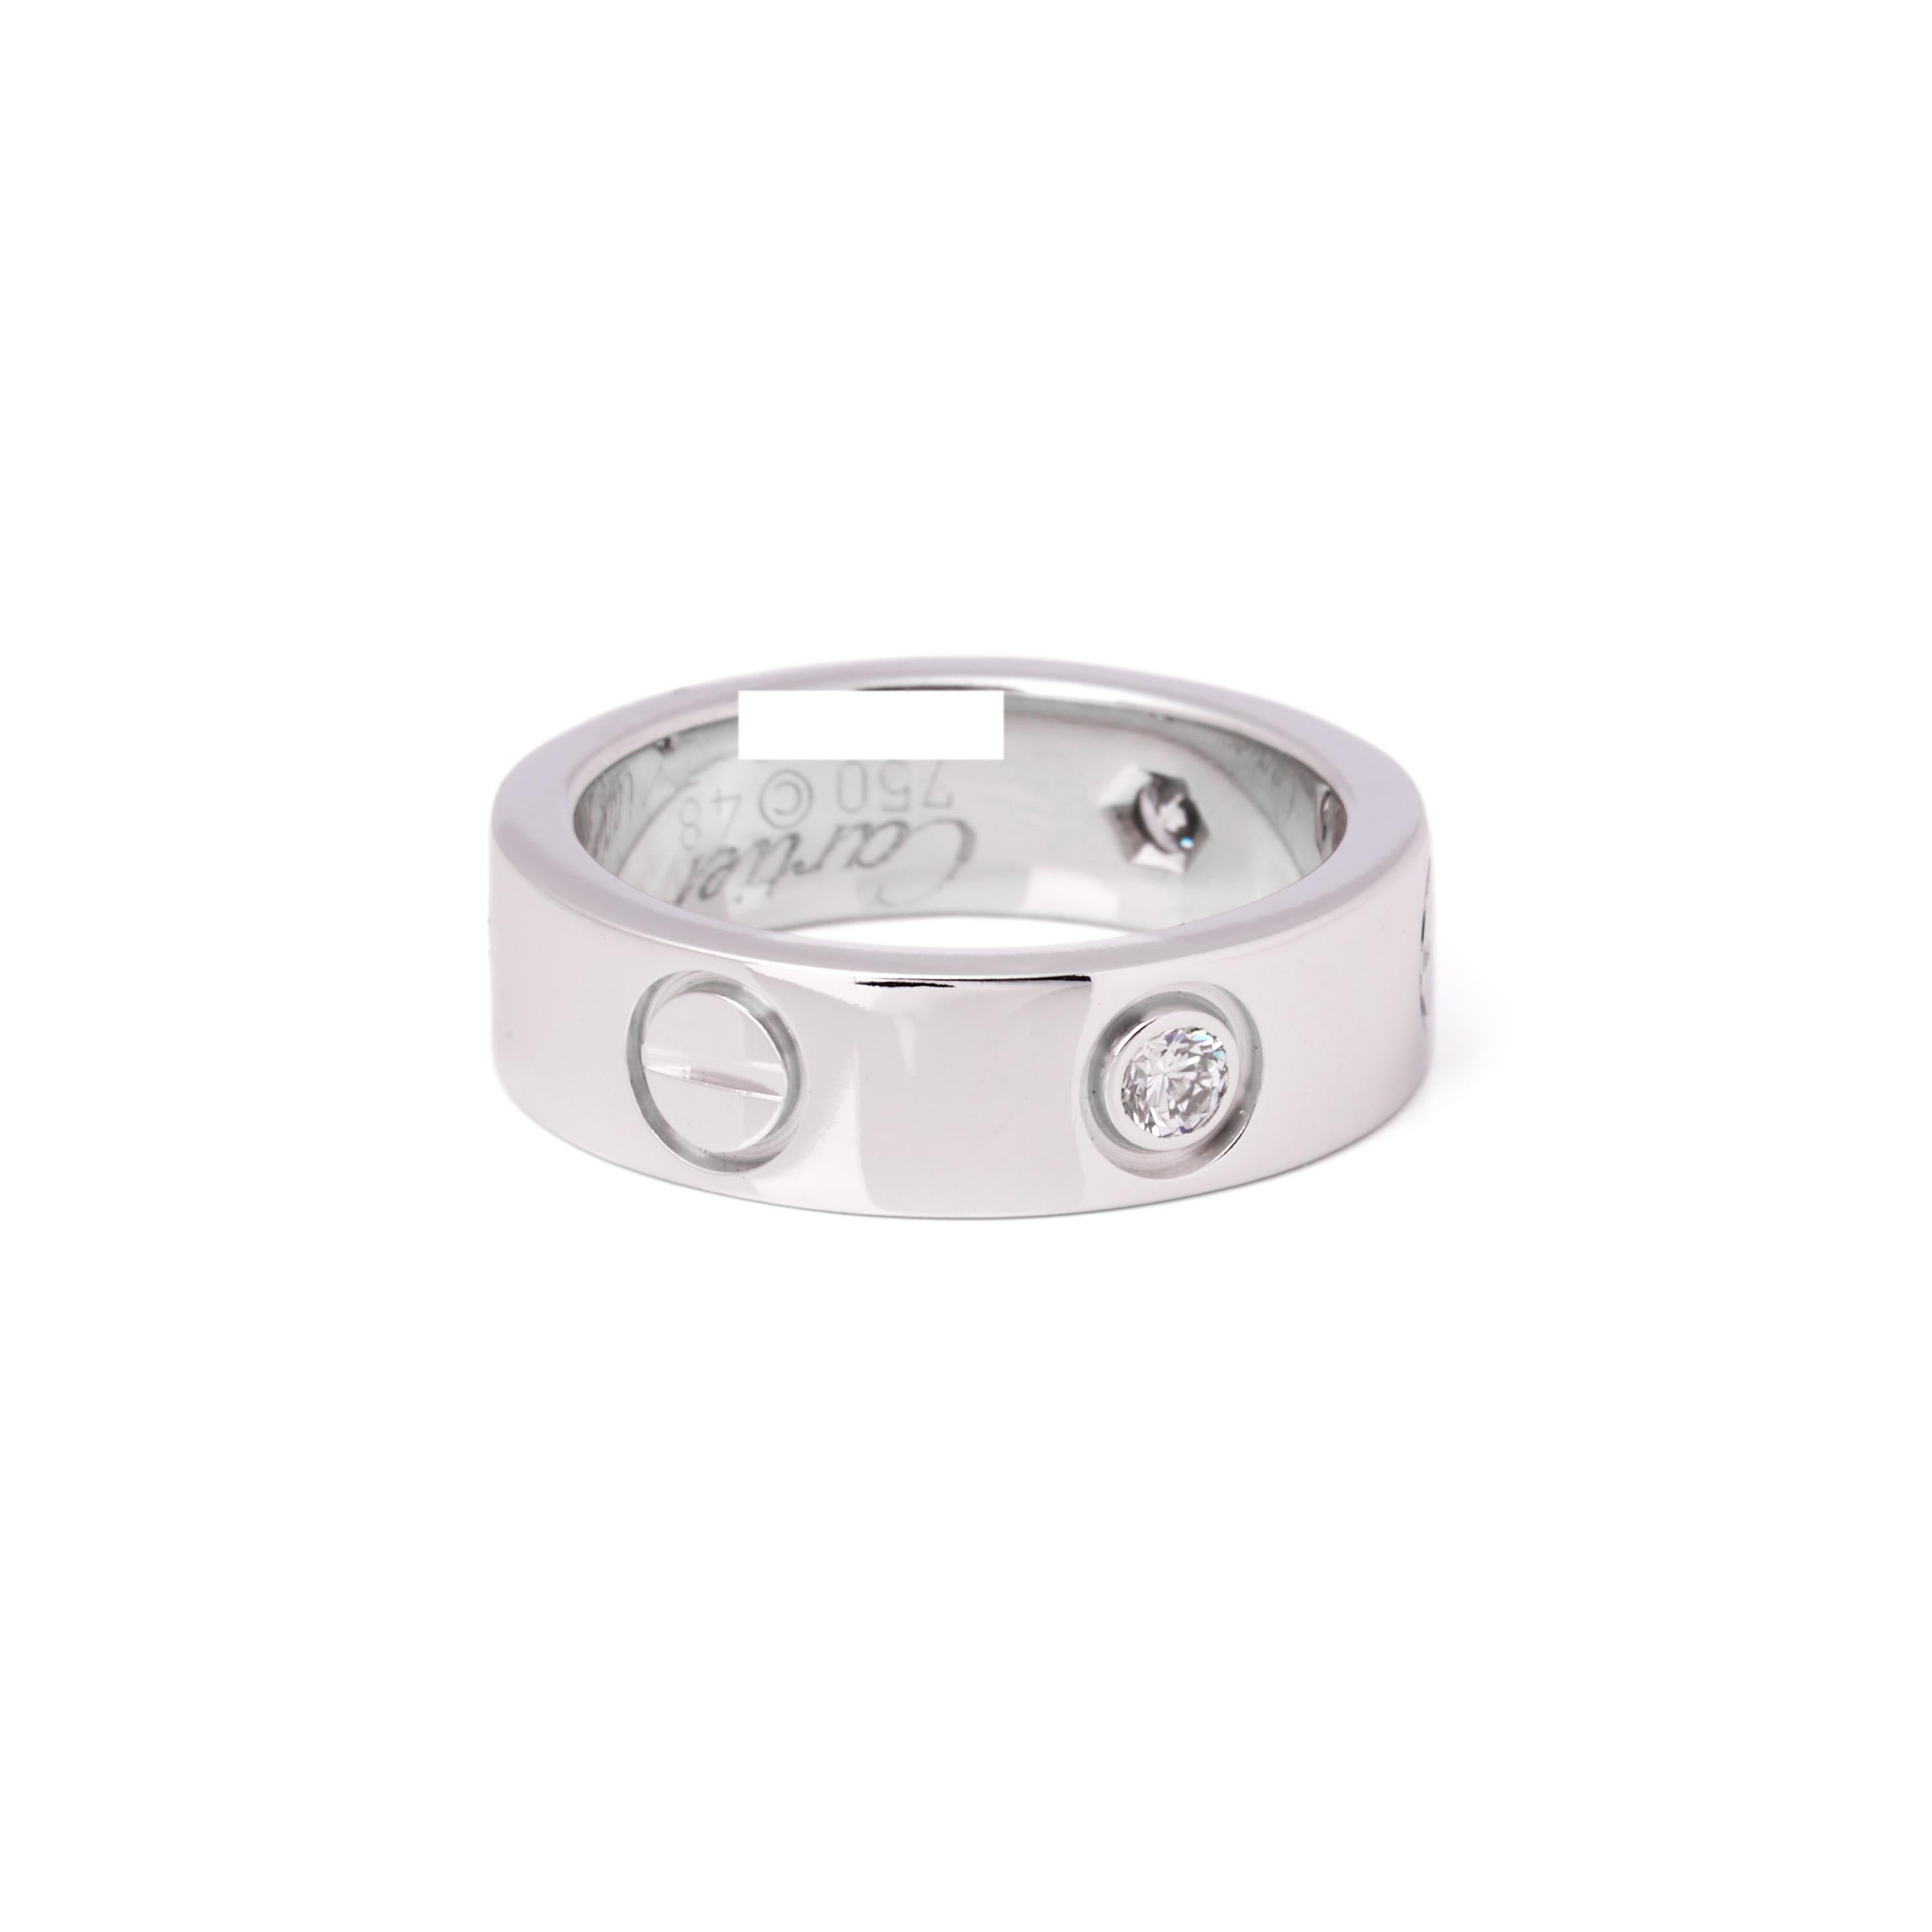 Cartier 3 Diamond 18ct White Gold Love Band Ring

Brand Cartier
Model 3 Diamond Love Band Ring
Product Type Ring
Serial Number AU****
Accompanied By Cartier Pouch
Material(s) 18ct White Gold
Gemstone Diamond
UK Ring Size I 1/2
EU Ring Size 48
US